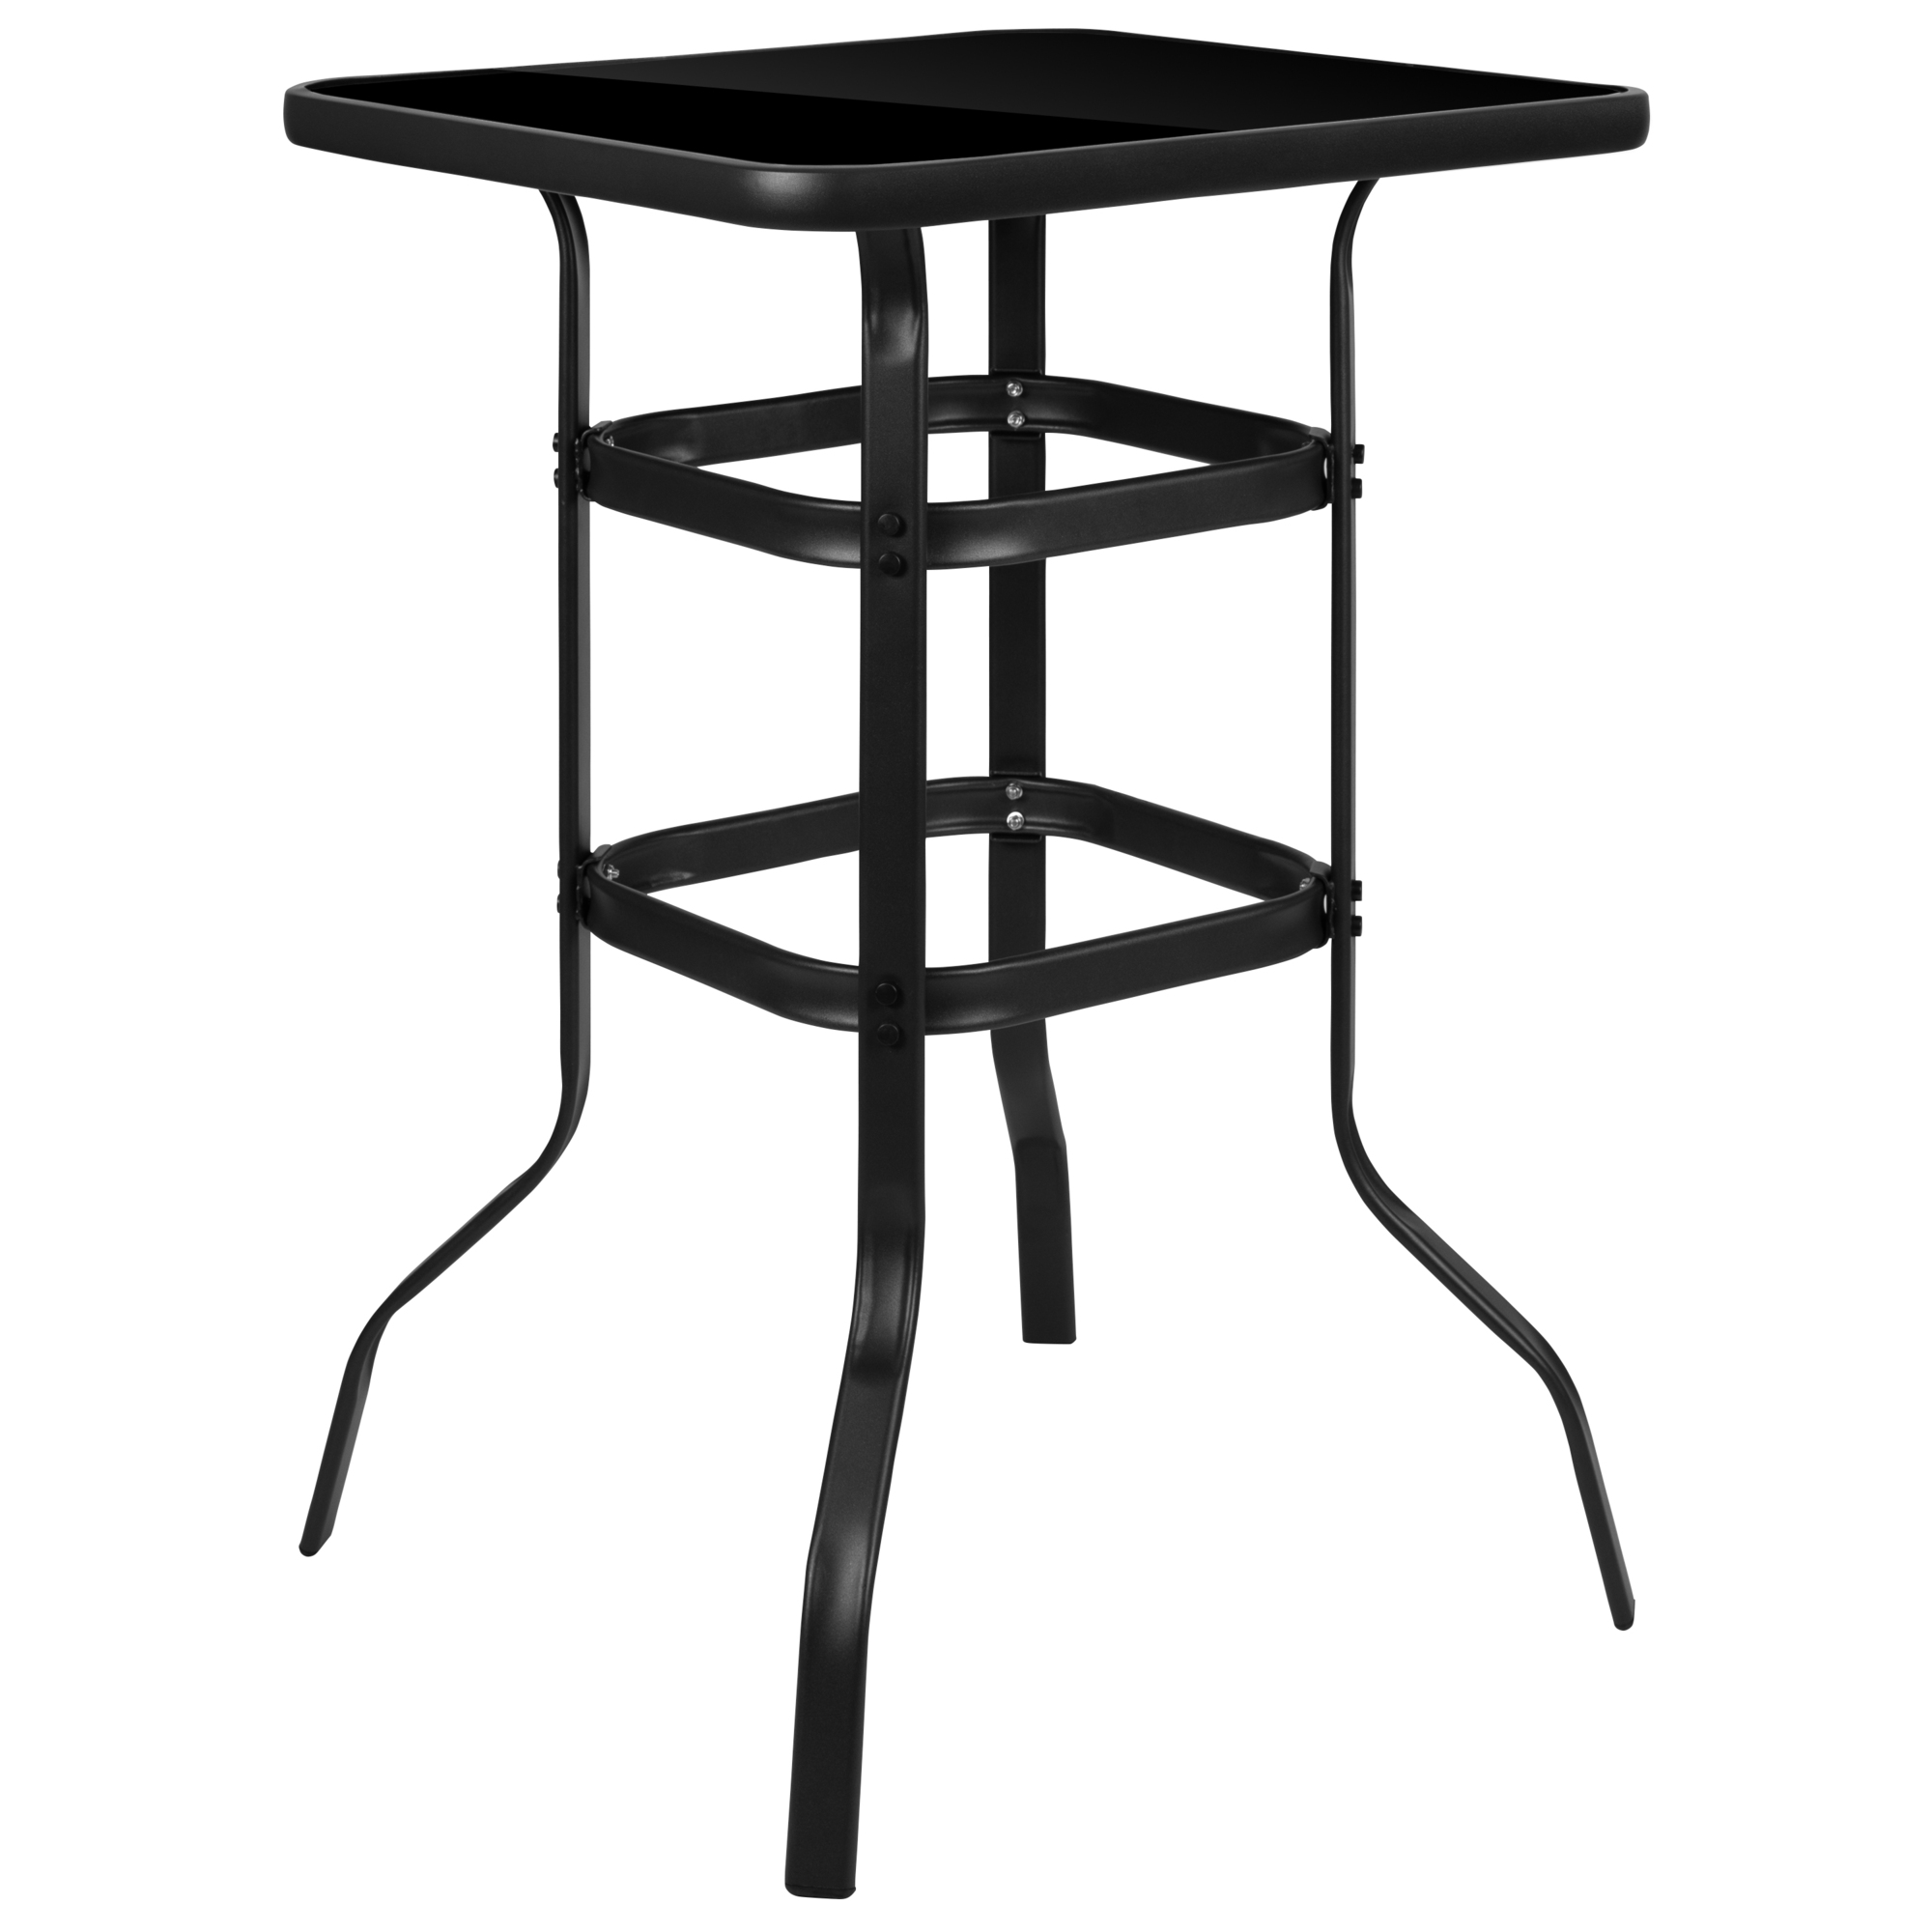 Flash Furniture, Black 27.5Inch Square Glass Metal Patio Bar Table, Table Shape Square, Primary Color Black, Height 39.5 in, Model TLH073HB